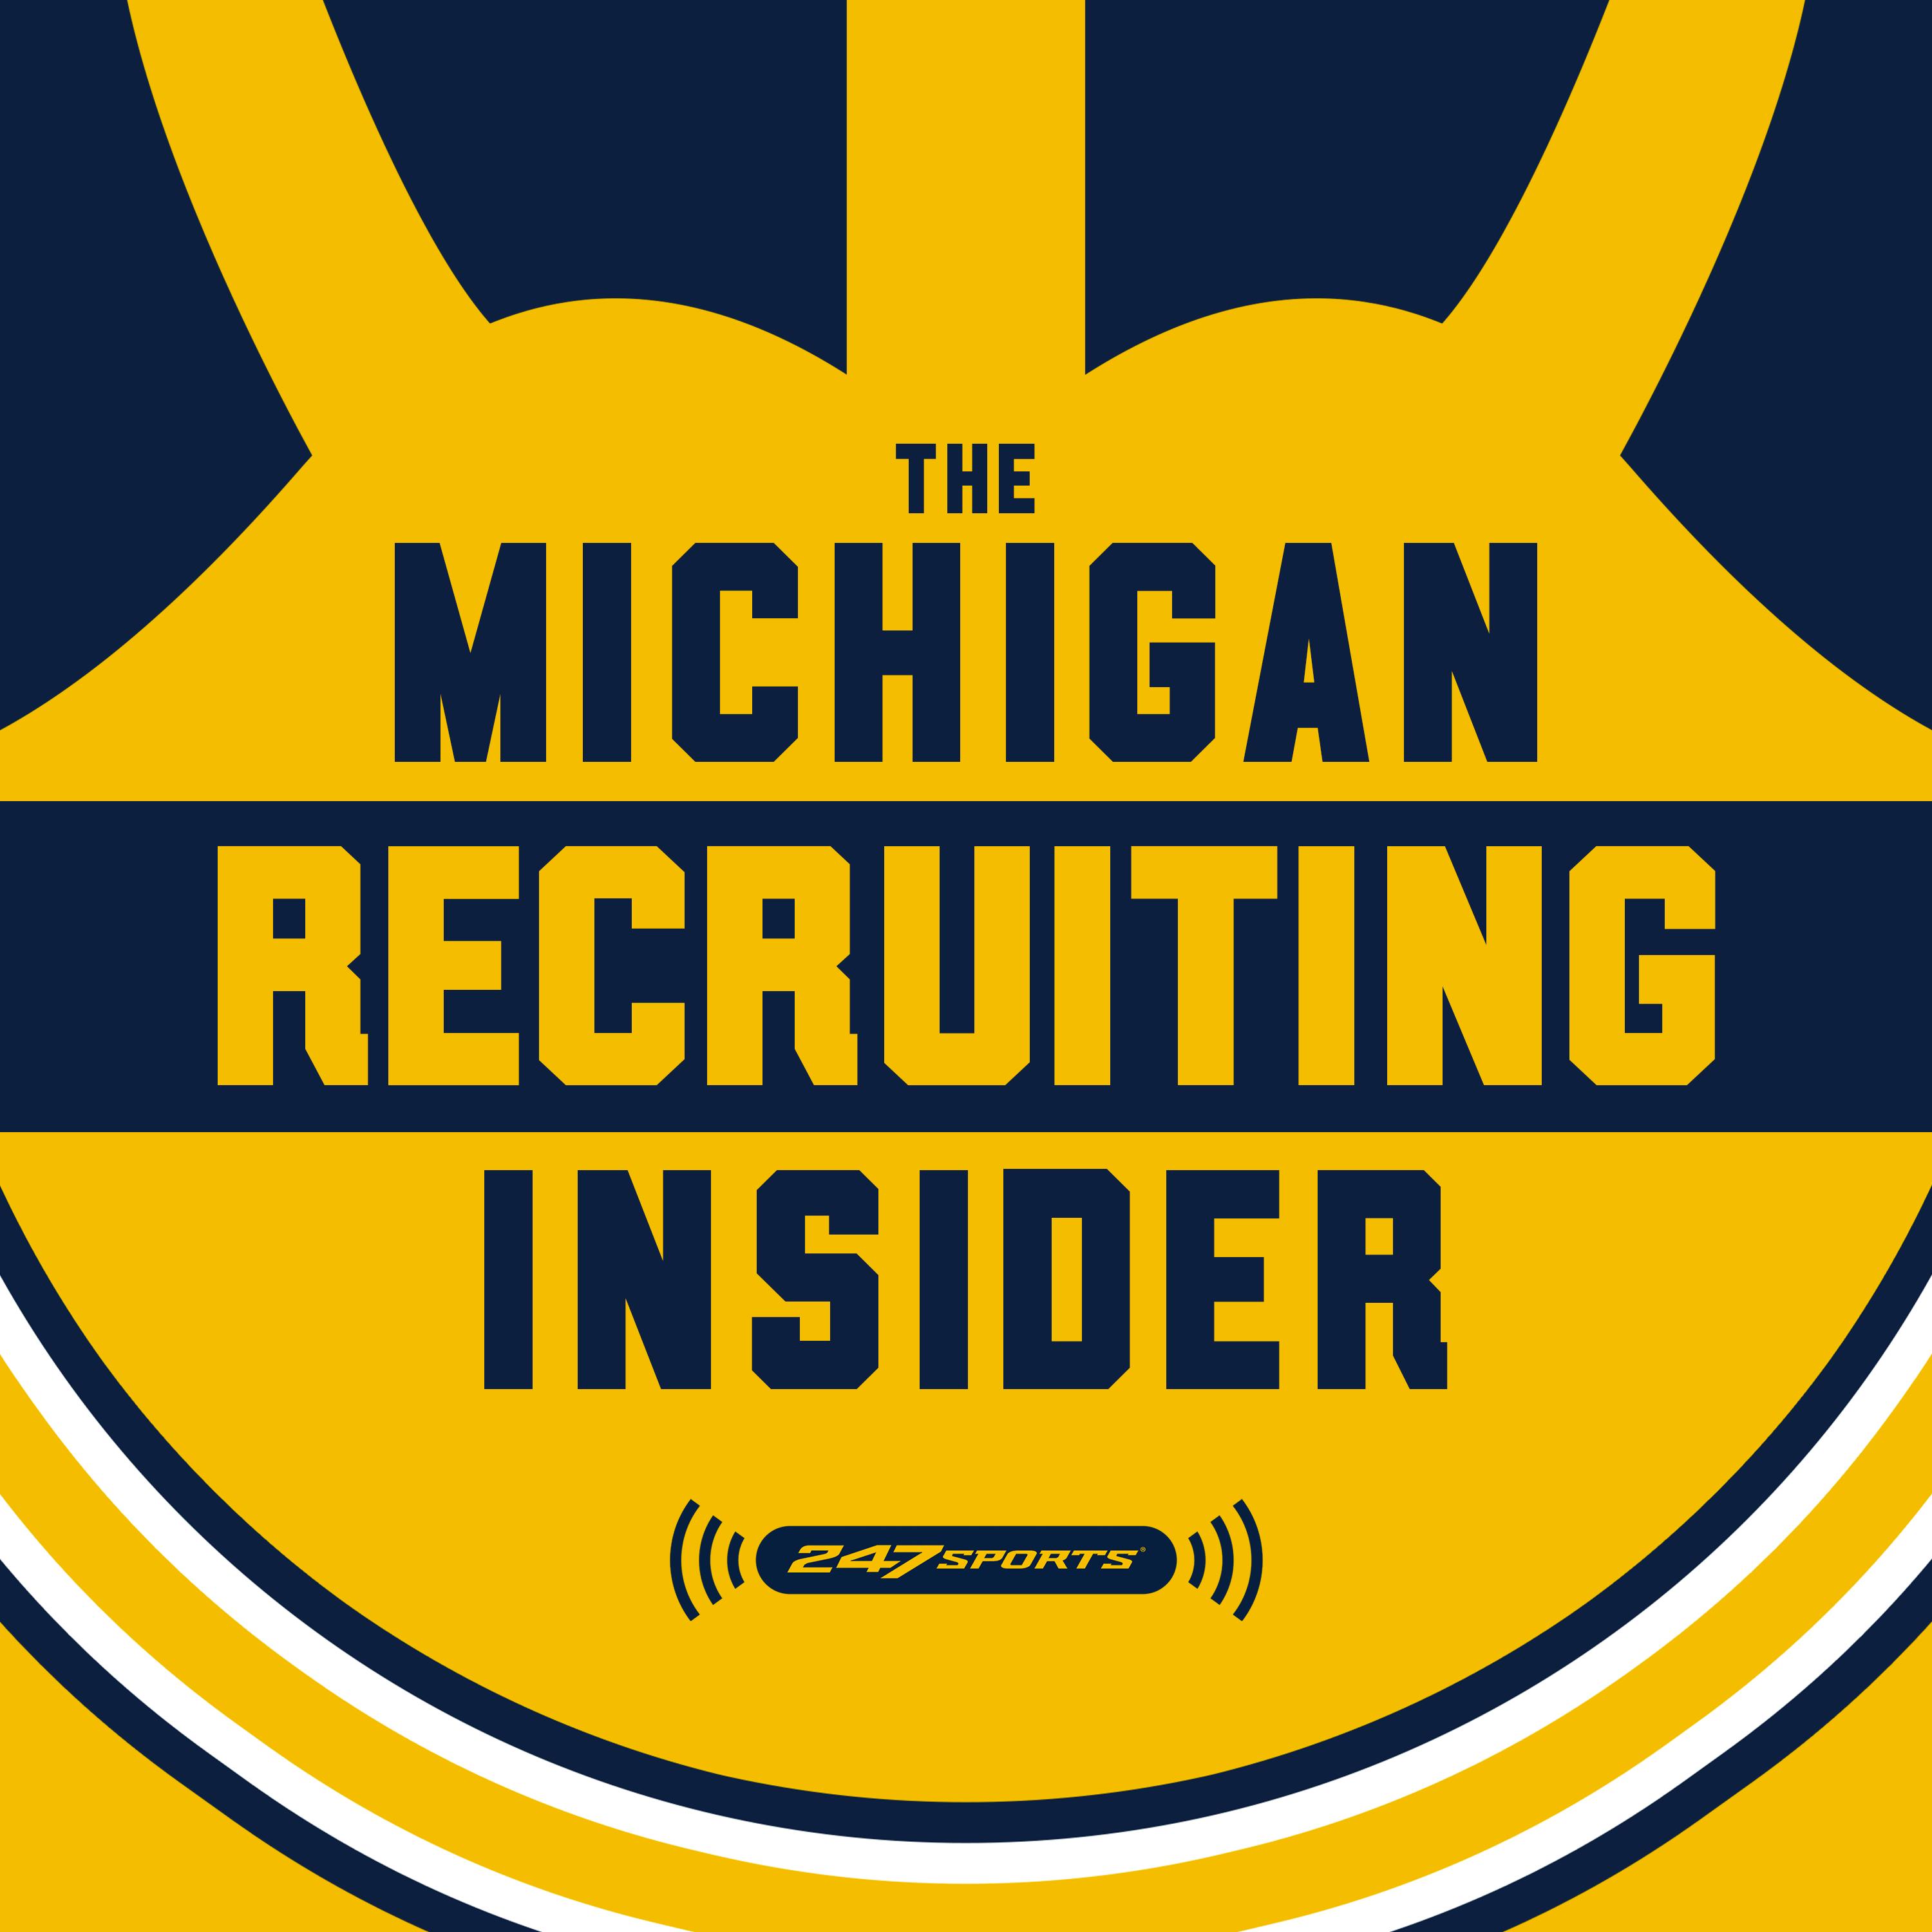 Jadyn Davis on recruiting: 'I'm ready to get this over with' - Michigan Recruiting Insider